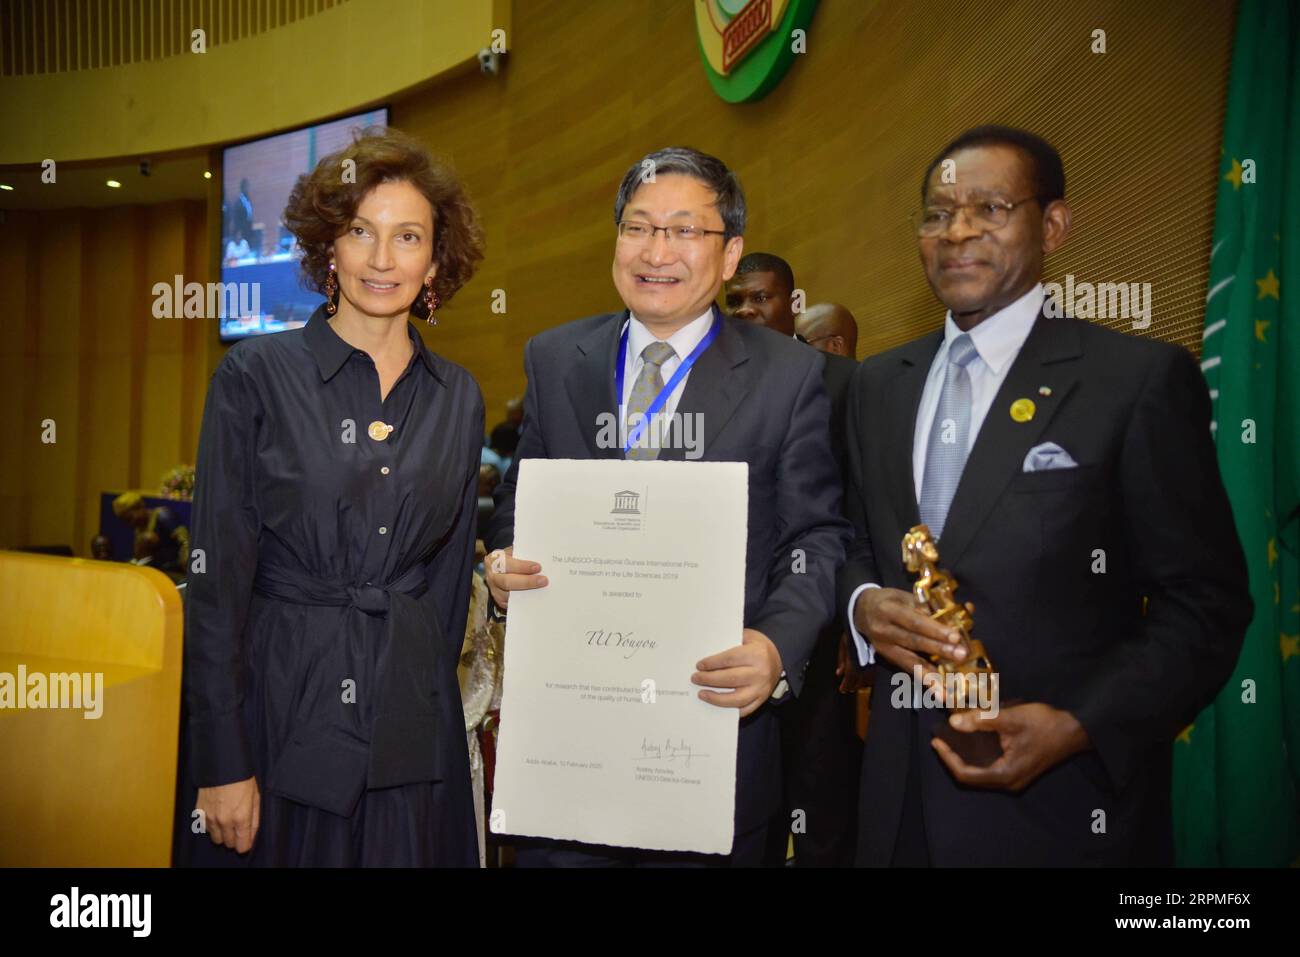 200211 -- ADDIS ABABA, Feb. 11, 2020 Xinhua -- Liu Yuxi C, head of the Chinese Mission to the AU, poses for photo with President of Equatorial Guinea Teodoro Obiang Nguema Mbasogo R and the Director-General of UNESCO Audrey Azoulay, after receiving the UNESCO-Equatorial Guinea International Prize for Research in the Life Sciences on behalf of Tu Youyou, in Addis Ababa, Ethiopia, Feb. 10, 2020. Chinese Nobel laureate Tu Youyou has been awarded the UNESCO-Equatorial Guinea International Prize for Research in the Life Sciences for her research into parasitic diseases. Photo by Michael Tewelde/Xin Stock Photo